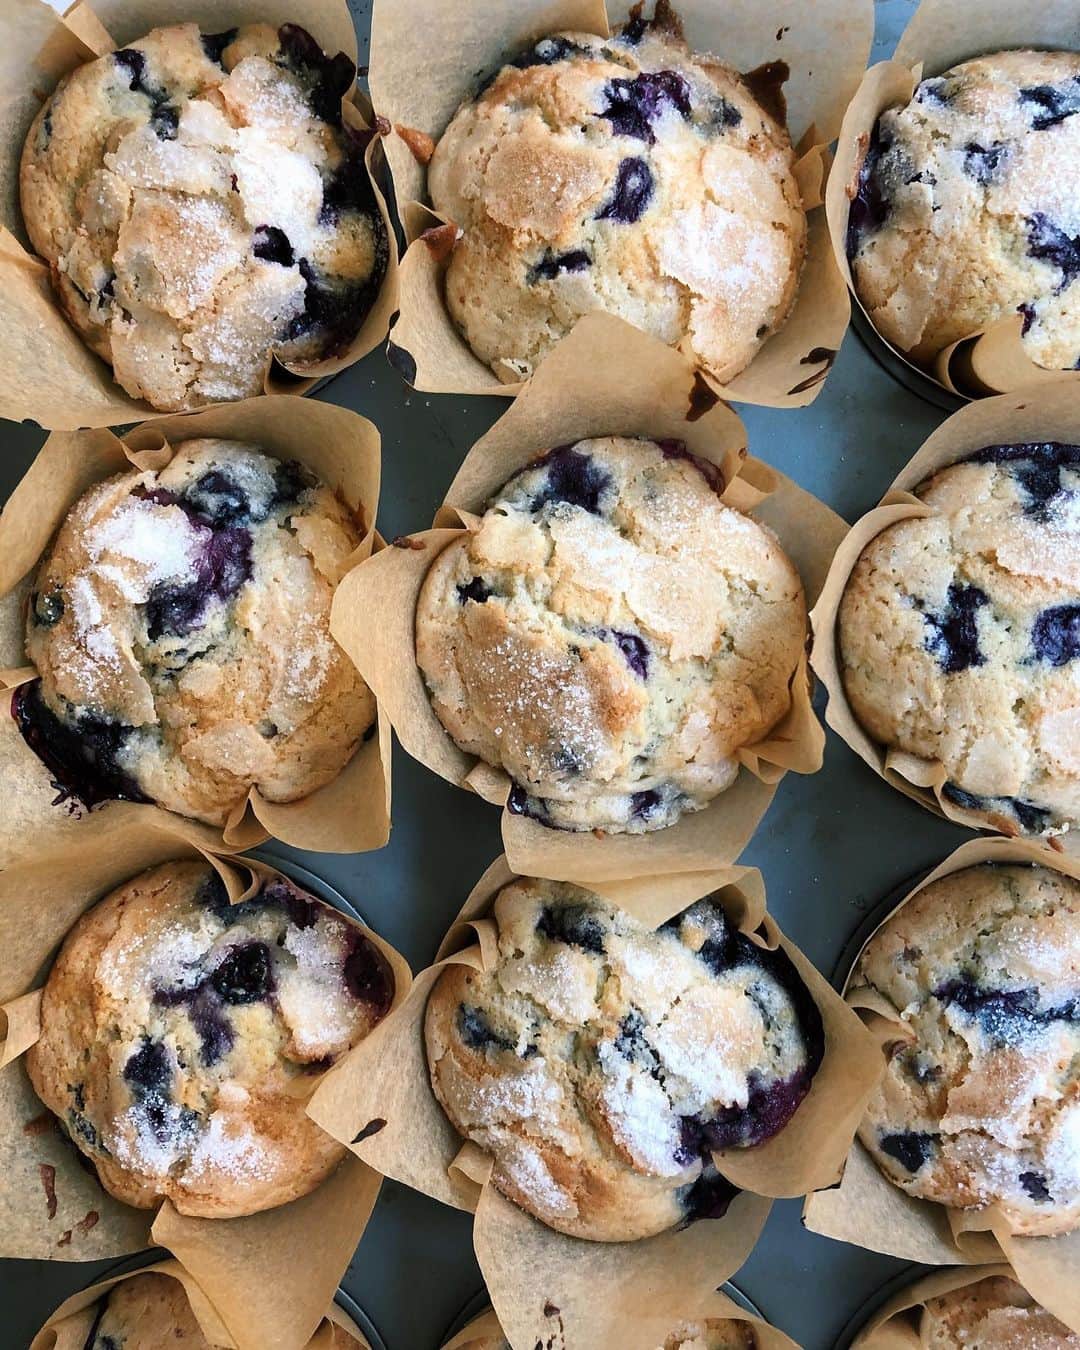 Antonietteのインスタグラム：「Looked forward to Sunday just so I could have a blueberry muffin and coffee this morning! I love these Jordan Marsh department store blueberry muffins. Recipe can be found on @kingarthurbaking ‘s website. The luscious blueberries strewn throughout and the irresistible crackly sugar topping makes for a breakfast treat! Never been to Jordan Marsh in Boston, but do love how back in the day that restaurants  and cafes were in these department stores to give shoppers sustenance during their shopping! These days, muffins give me sustenance during my online shopping. 😆 Now I’m intrigued to make Bloomingdale’s Forty Carrots restaurant’s  frozen yogurt. I love a tart plain yogurt so this seems right up my alley. Has anyone made it?」